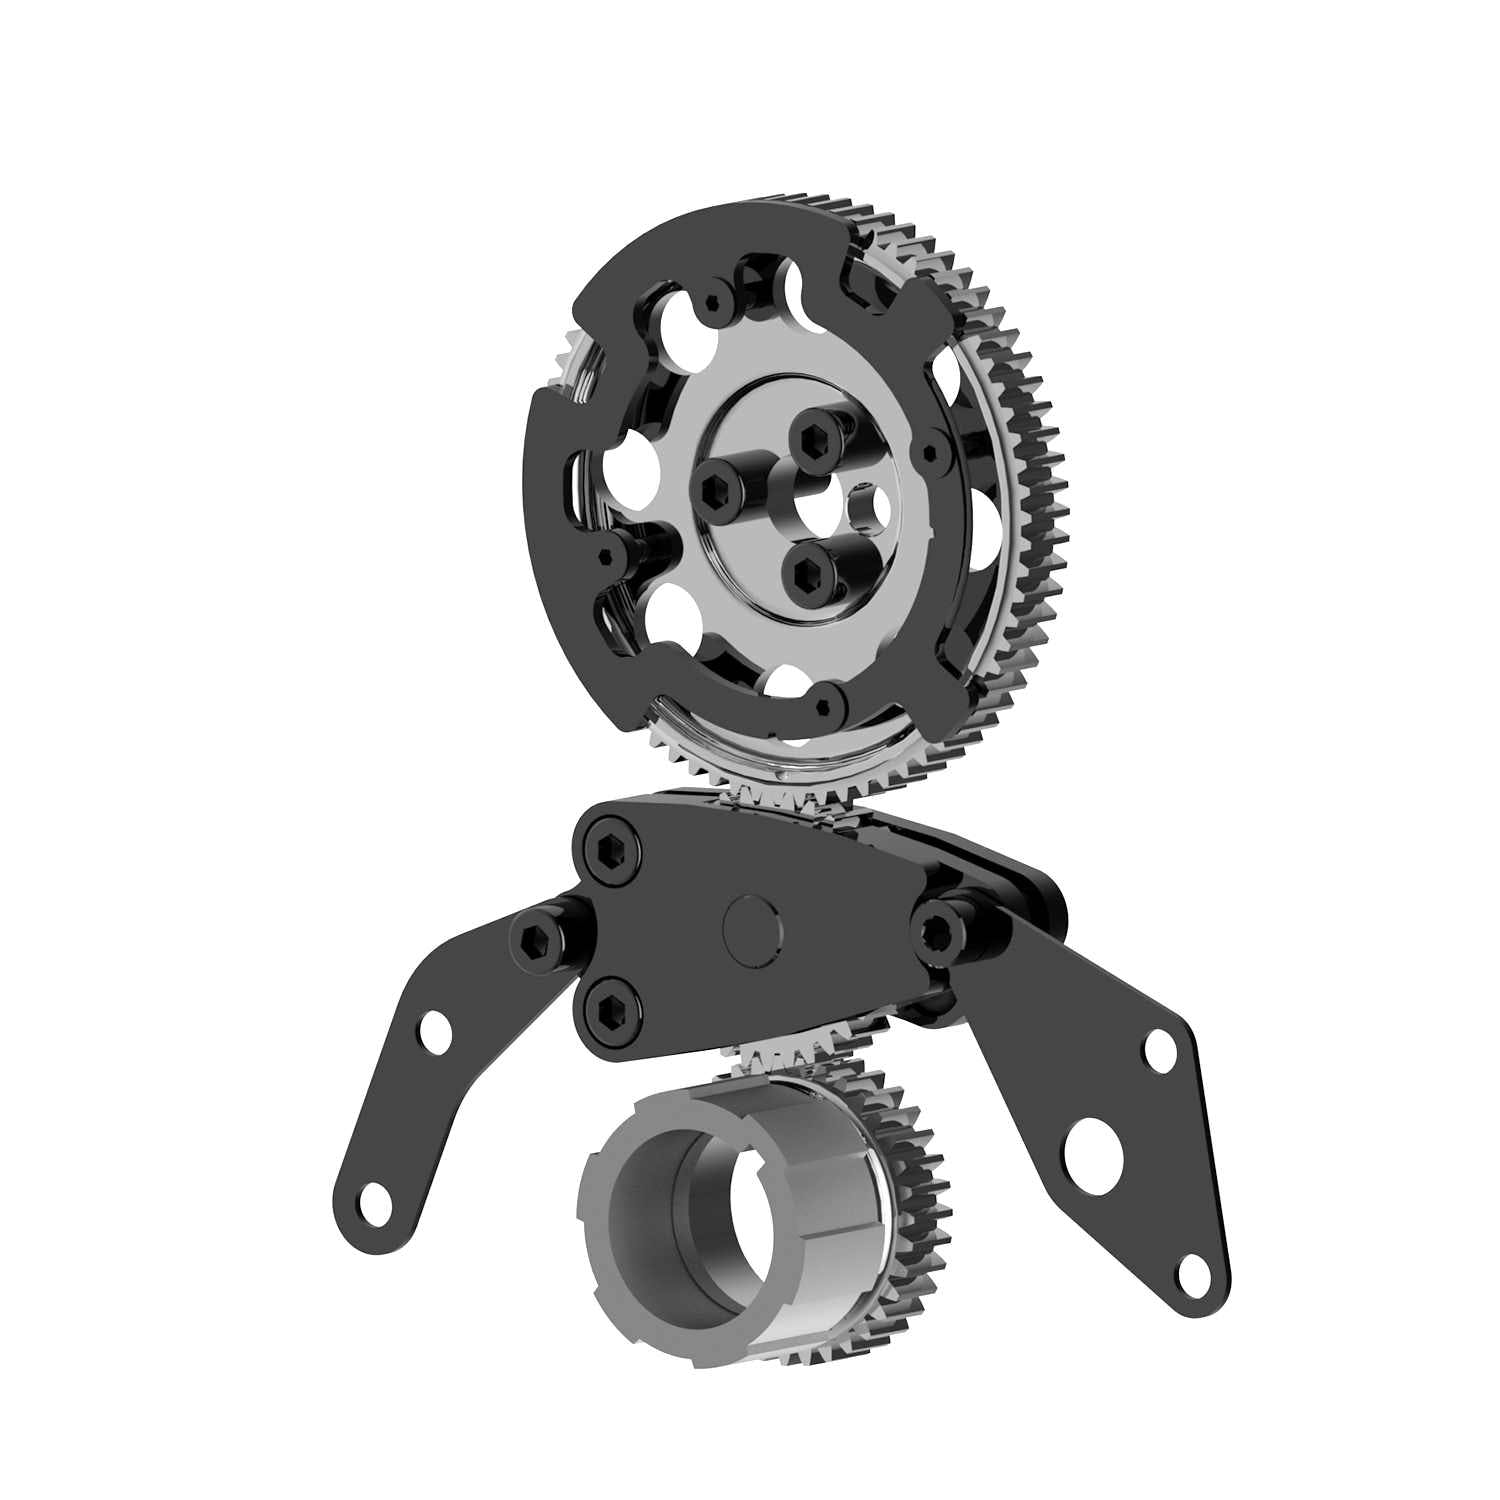 Competition Cams 5495 GM LS Gear Drive Timing Set